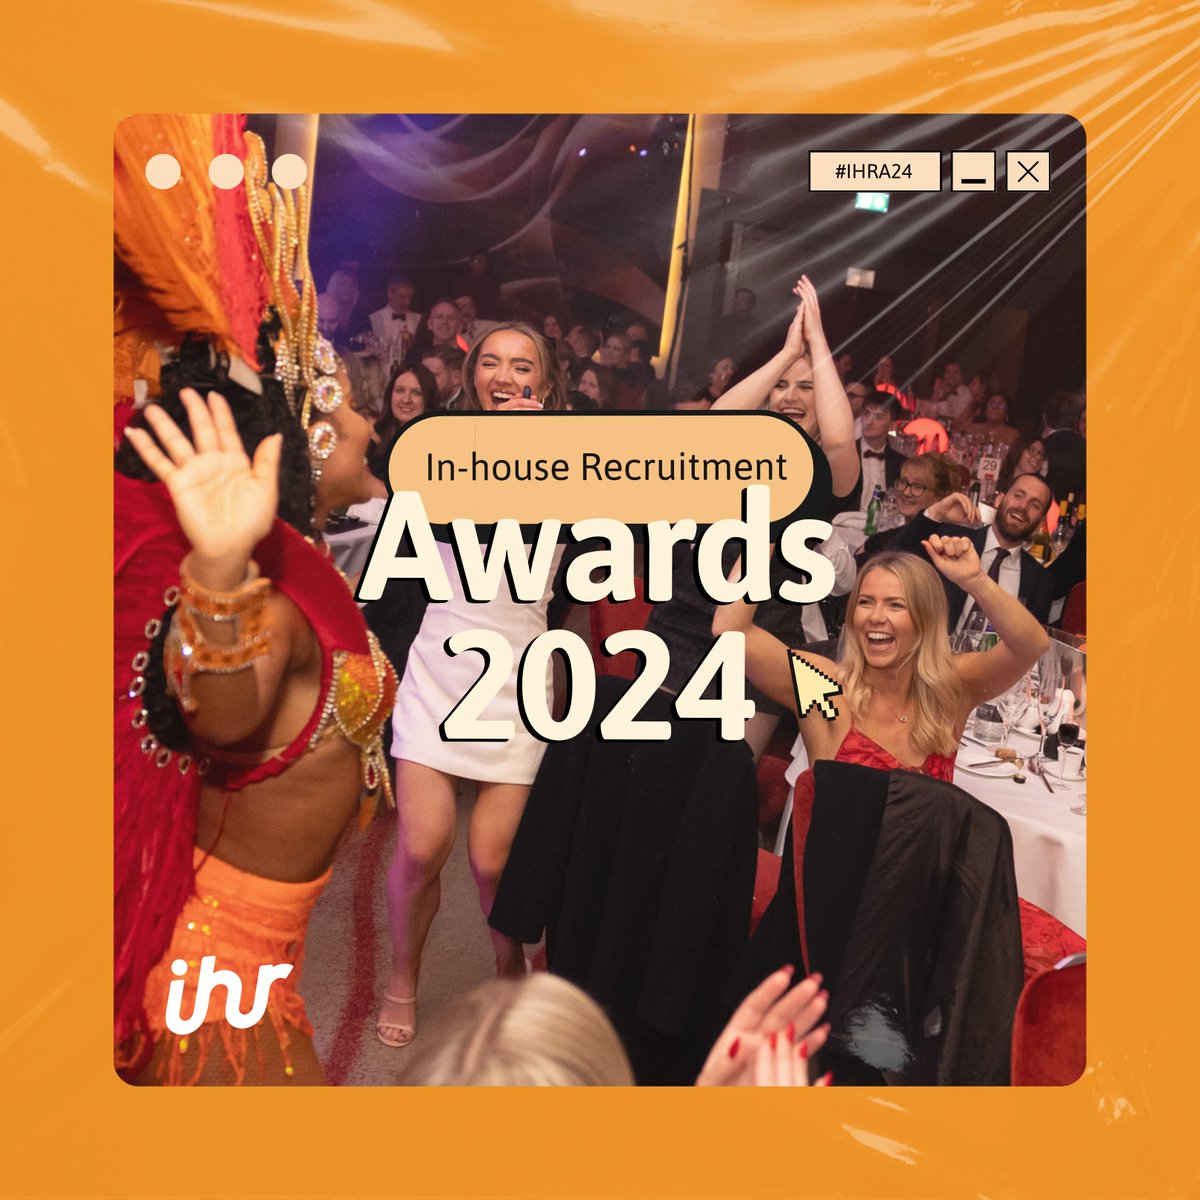 Entries are now open for #IHRA24 🏆 With 22 categories to choose from, the awards are open to in-house recruiters from all company sizes and industries, and completely FREE to enter. There are just 6 weeks to submit entries, until 30th of June: hubs.li/Q02x3dkR0